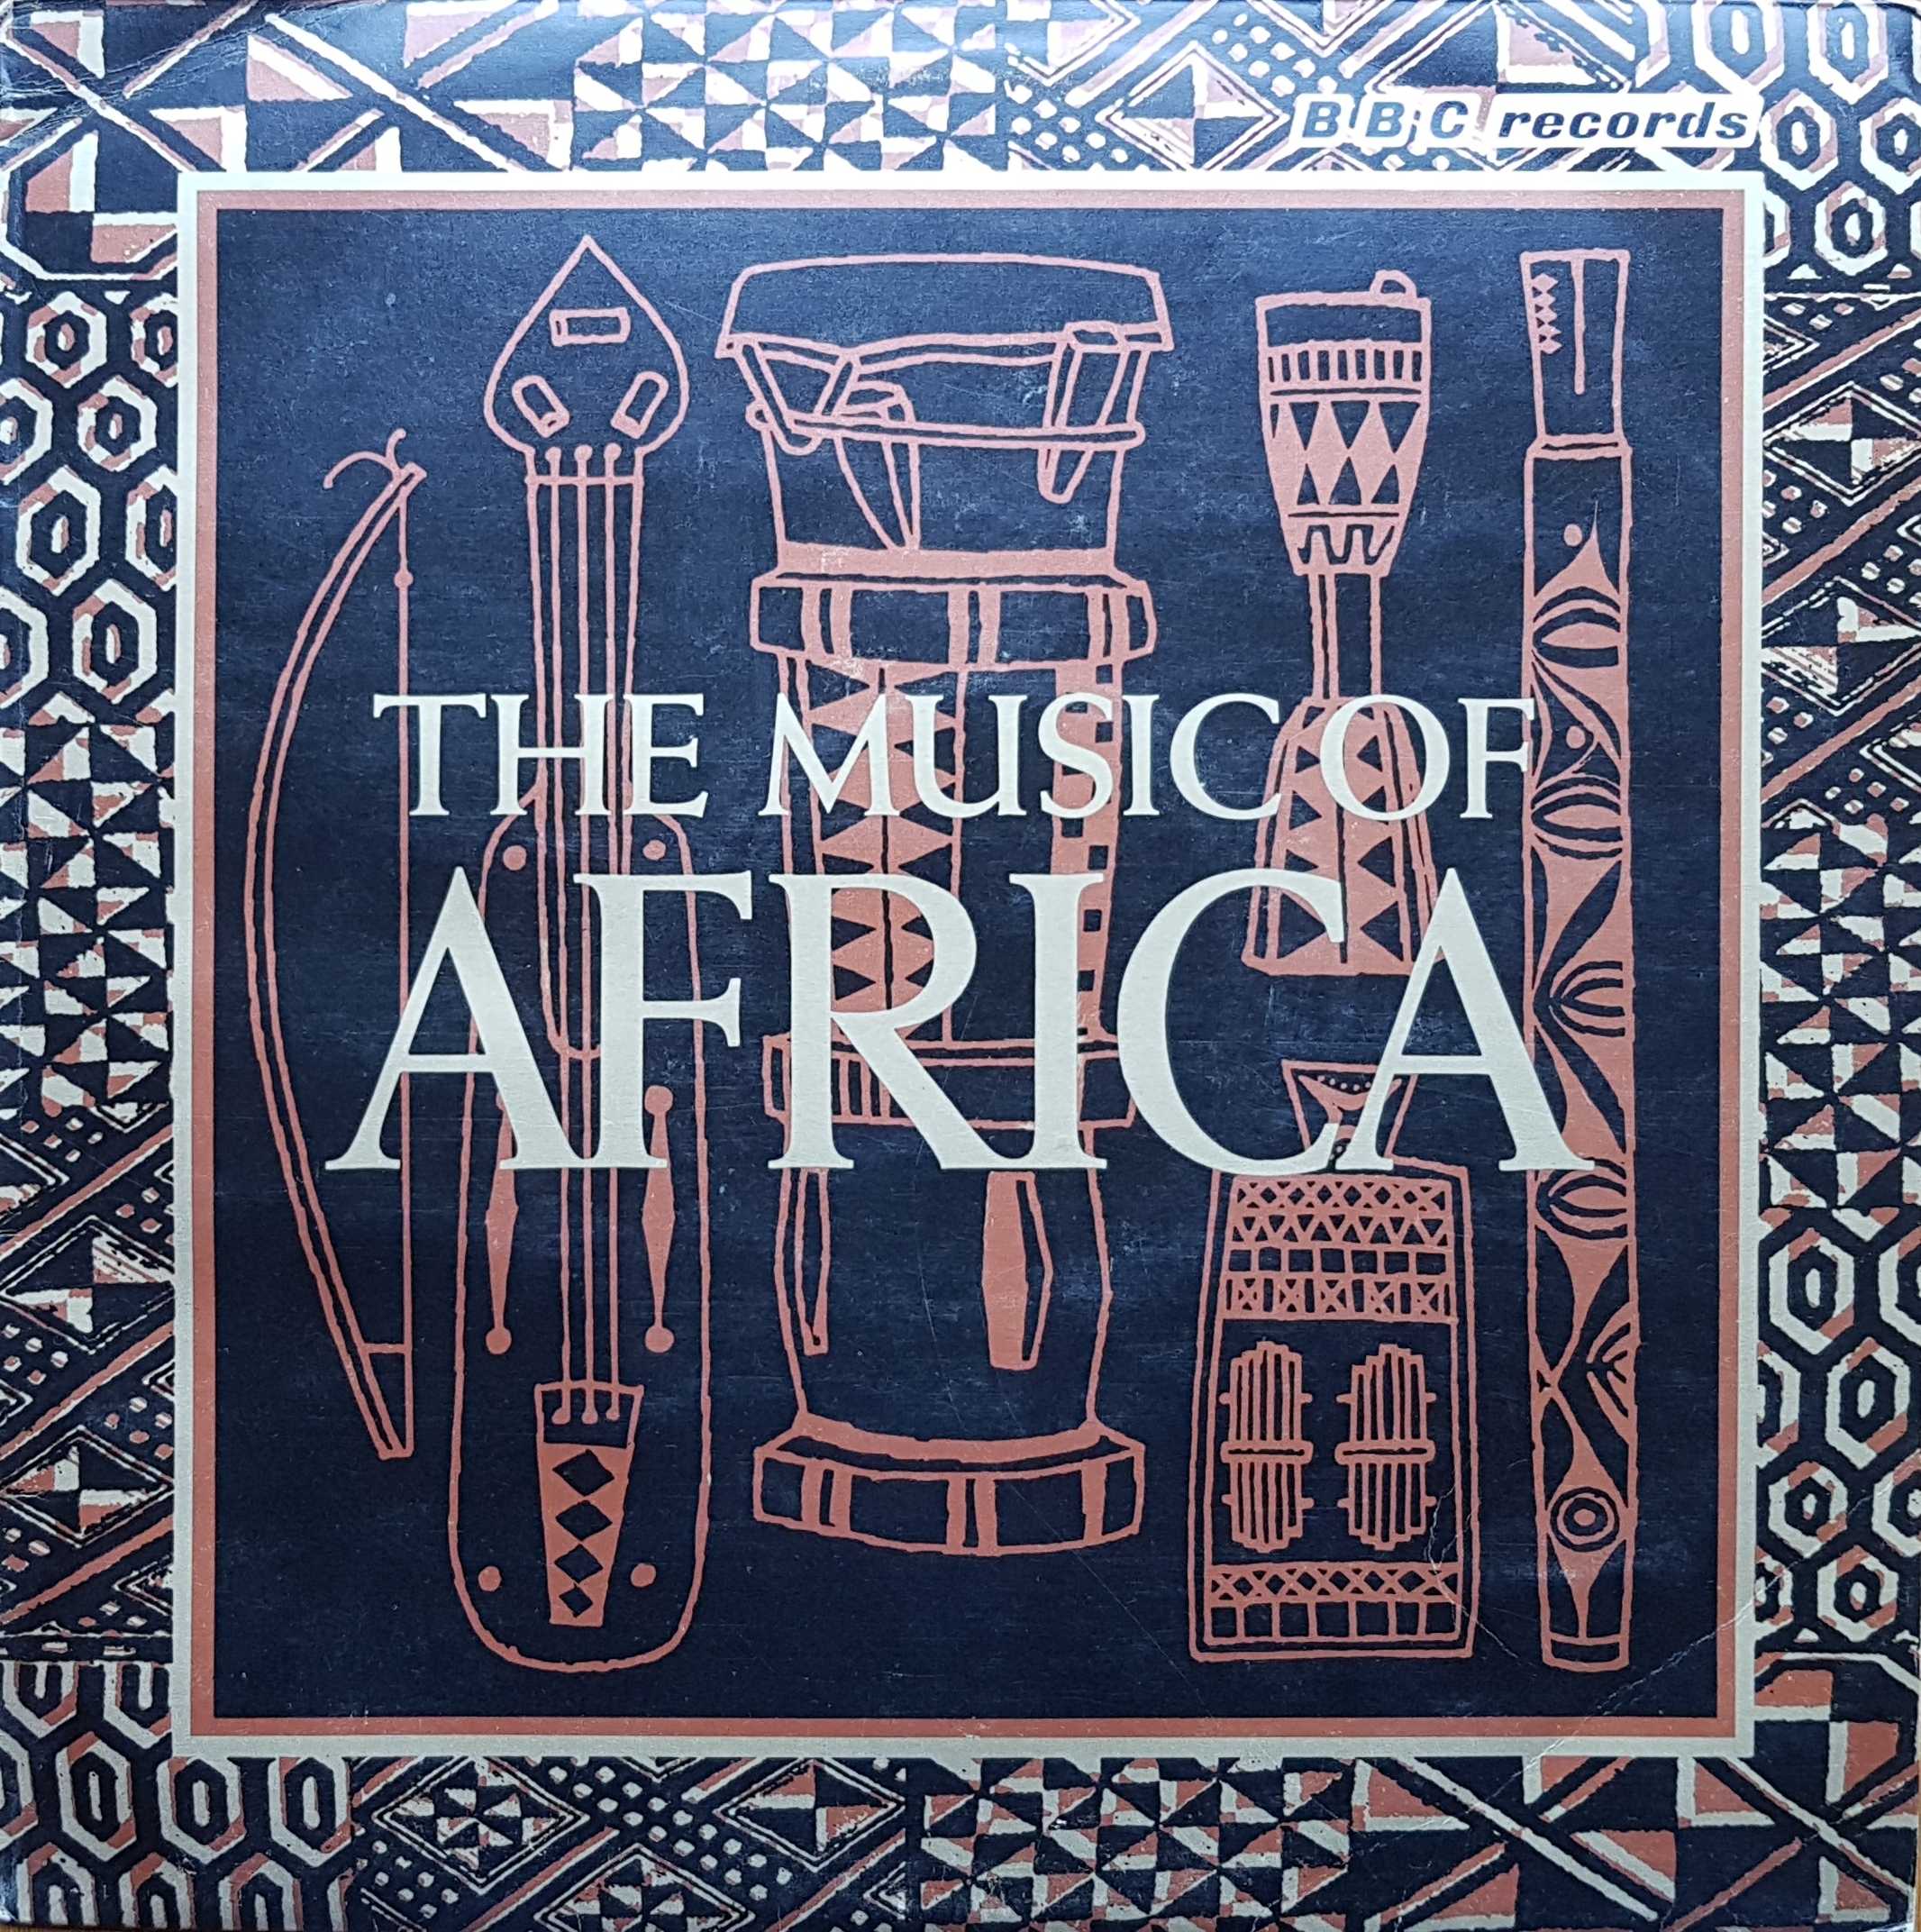 Picture of REC 130 The Music of Africa by artist Various from the BBC albums - Records and Tapes library